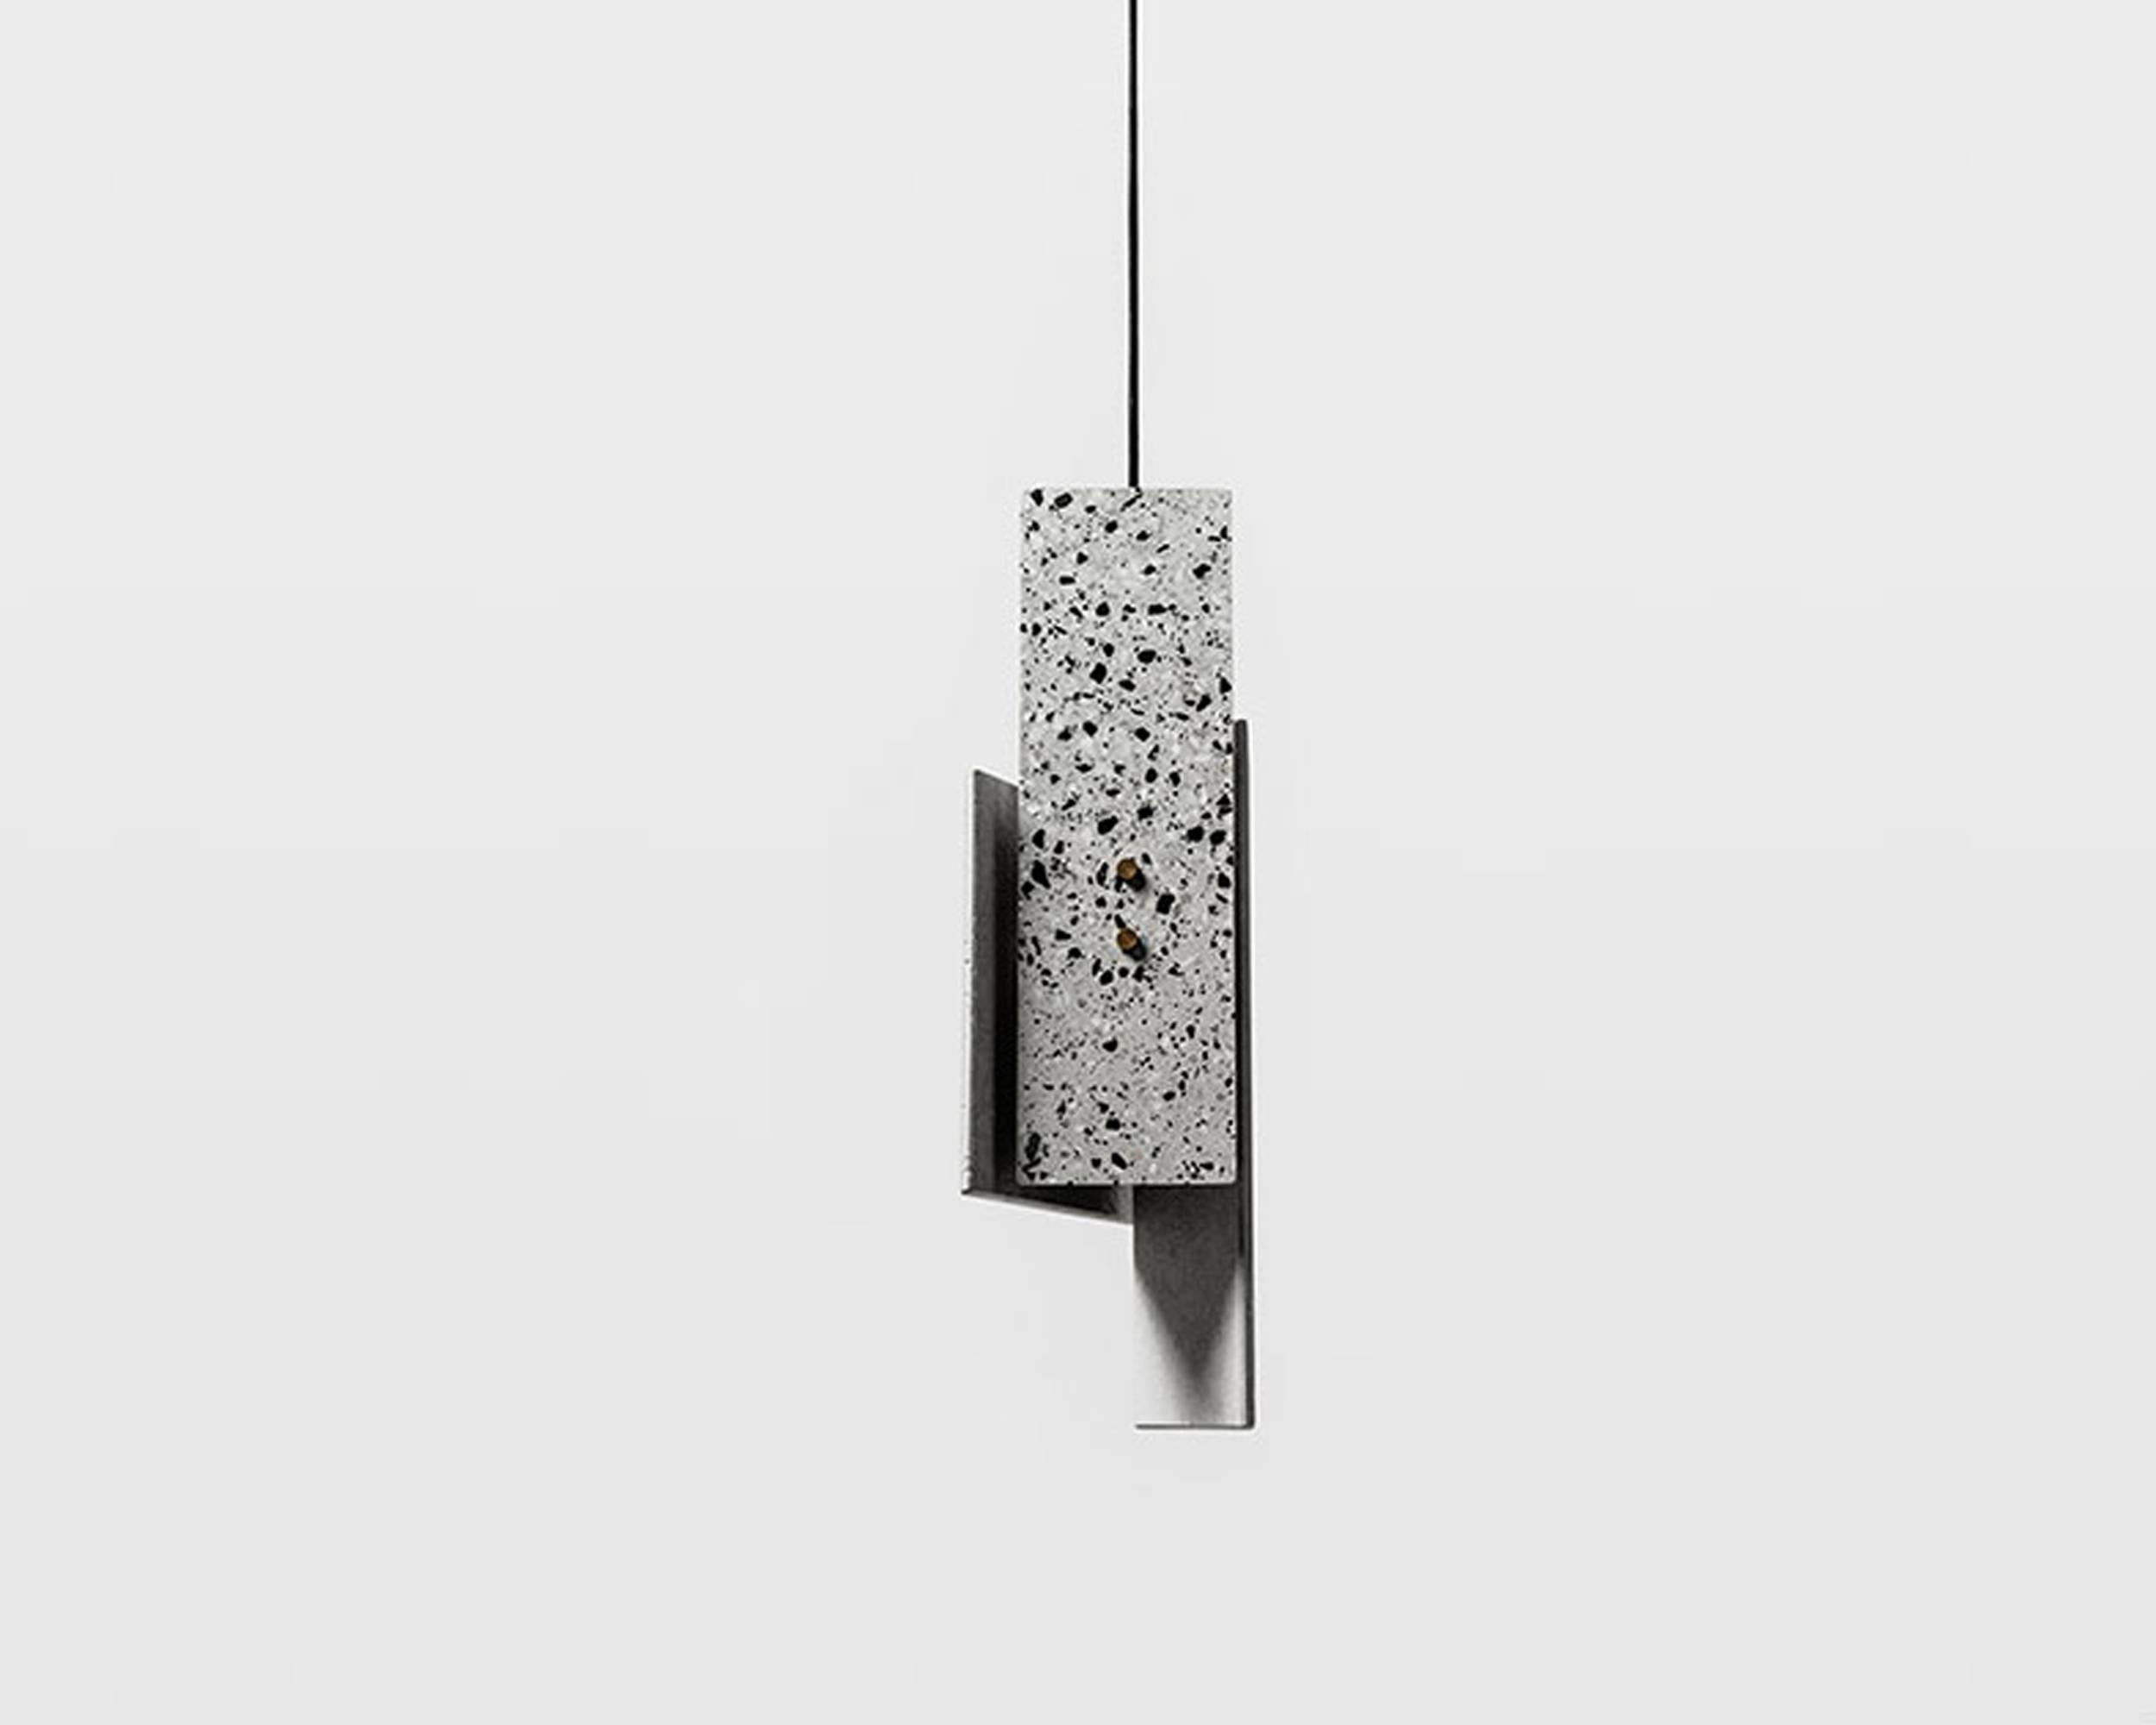 Terrazzo pendant lamp designed by Cantonese studio Bentu Design

Black wire 2m adjustable. Bulb E27 LED 3W 100-240V 80Ra 200LM 2700K 
53.2 cm x 17.7 cm x 16.3 cm

These pendant lamps are available in different colors of terrazzo: white, black, red